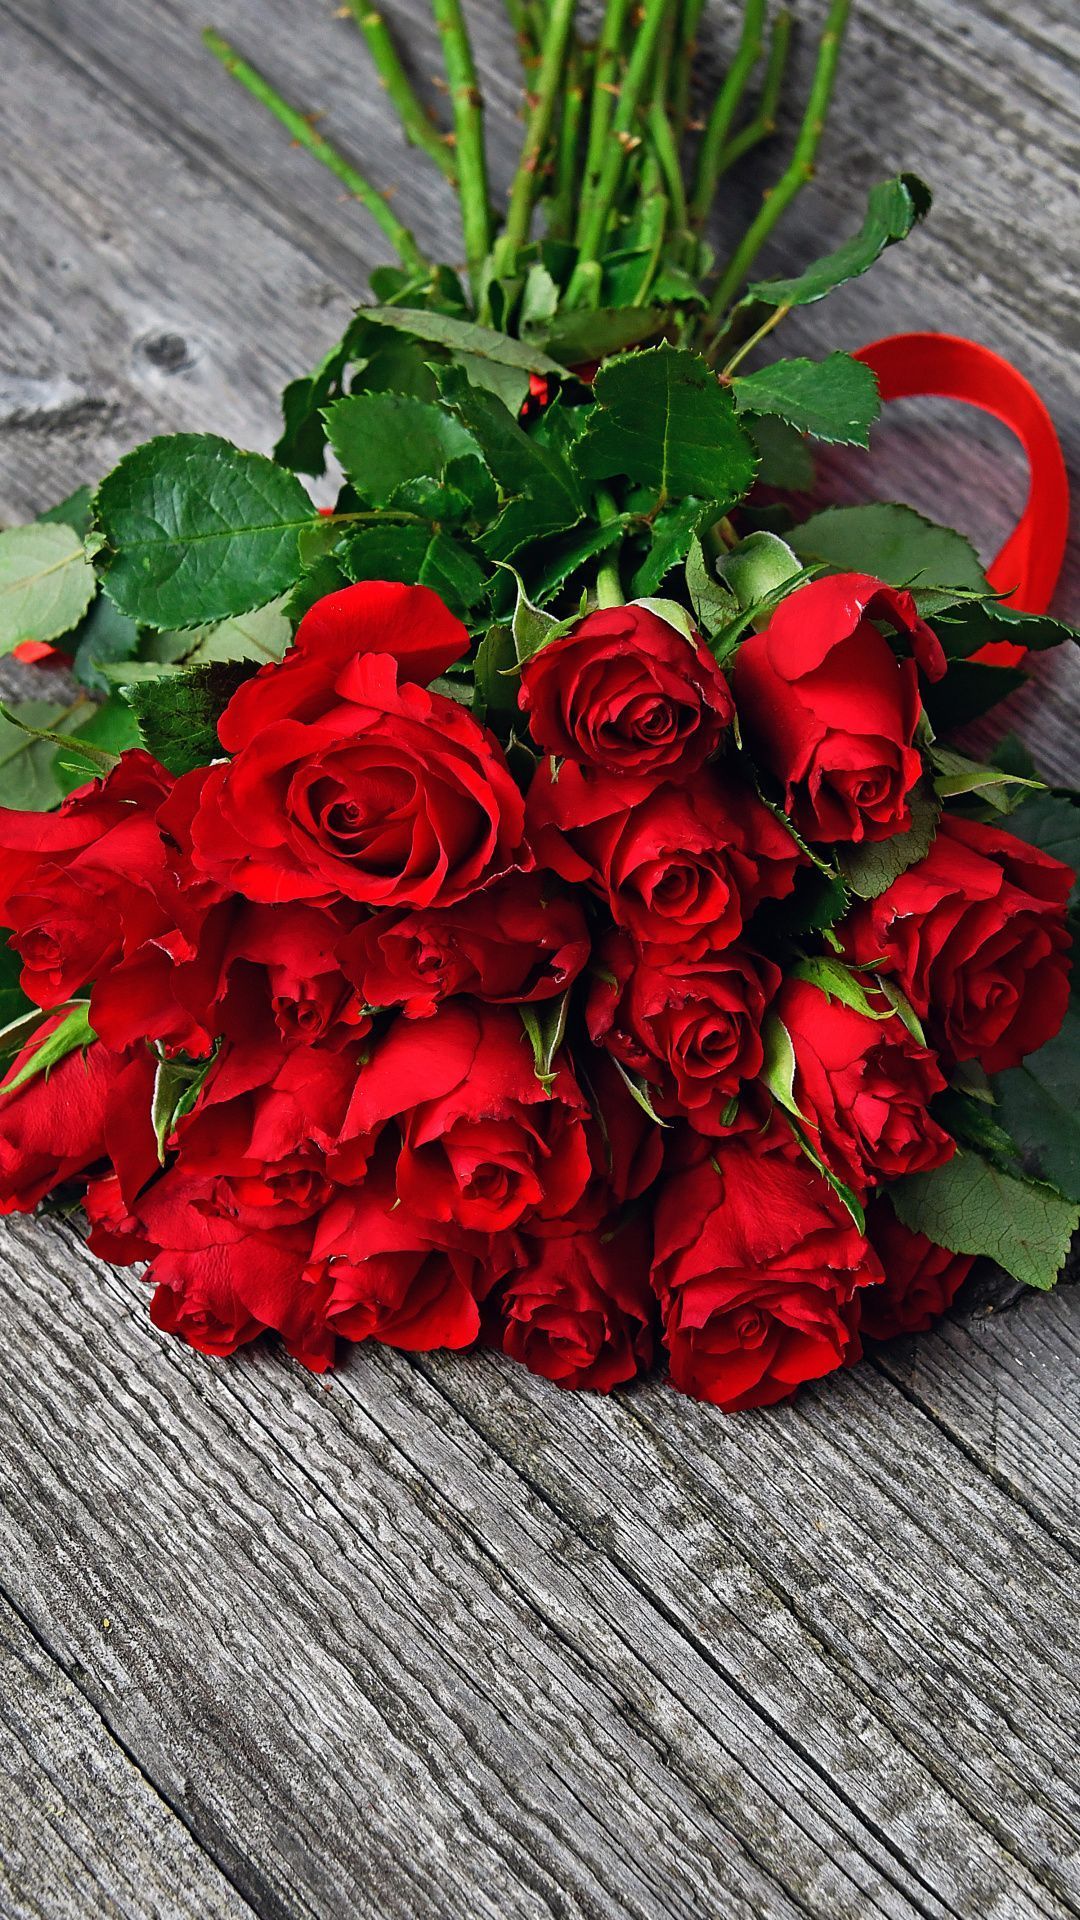 Love Flowers Wallpaper Android. Red flower bouquet, Red roses wallpaper, Red rose bouquet